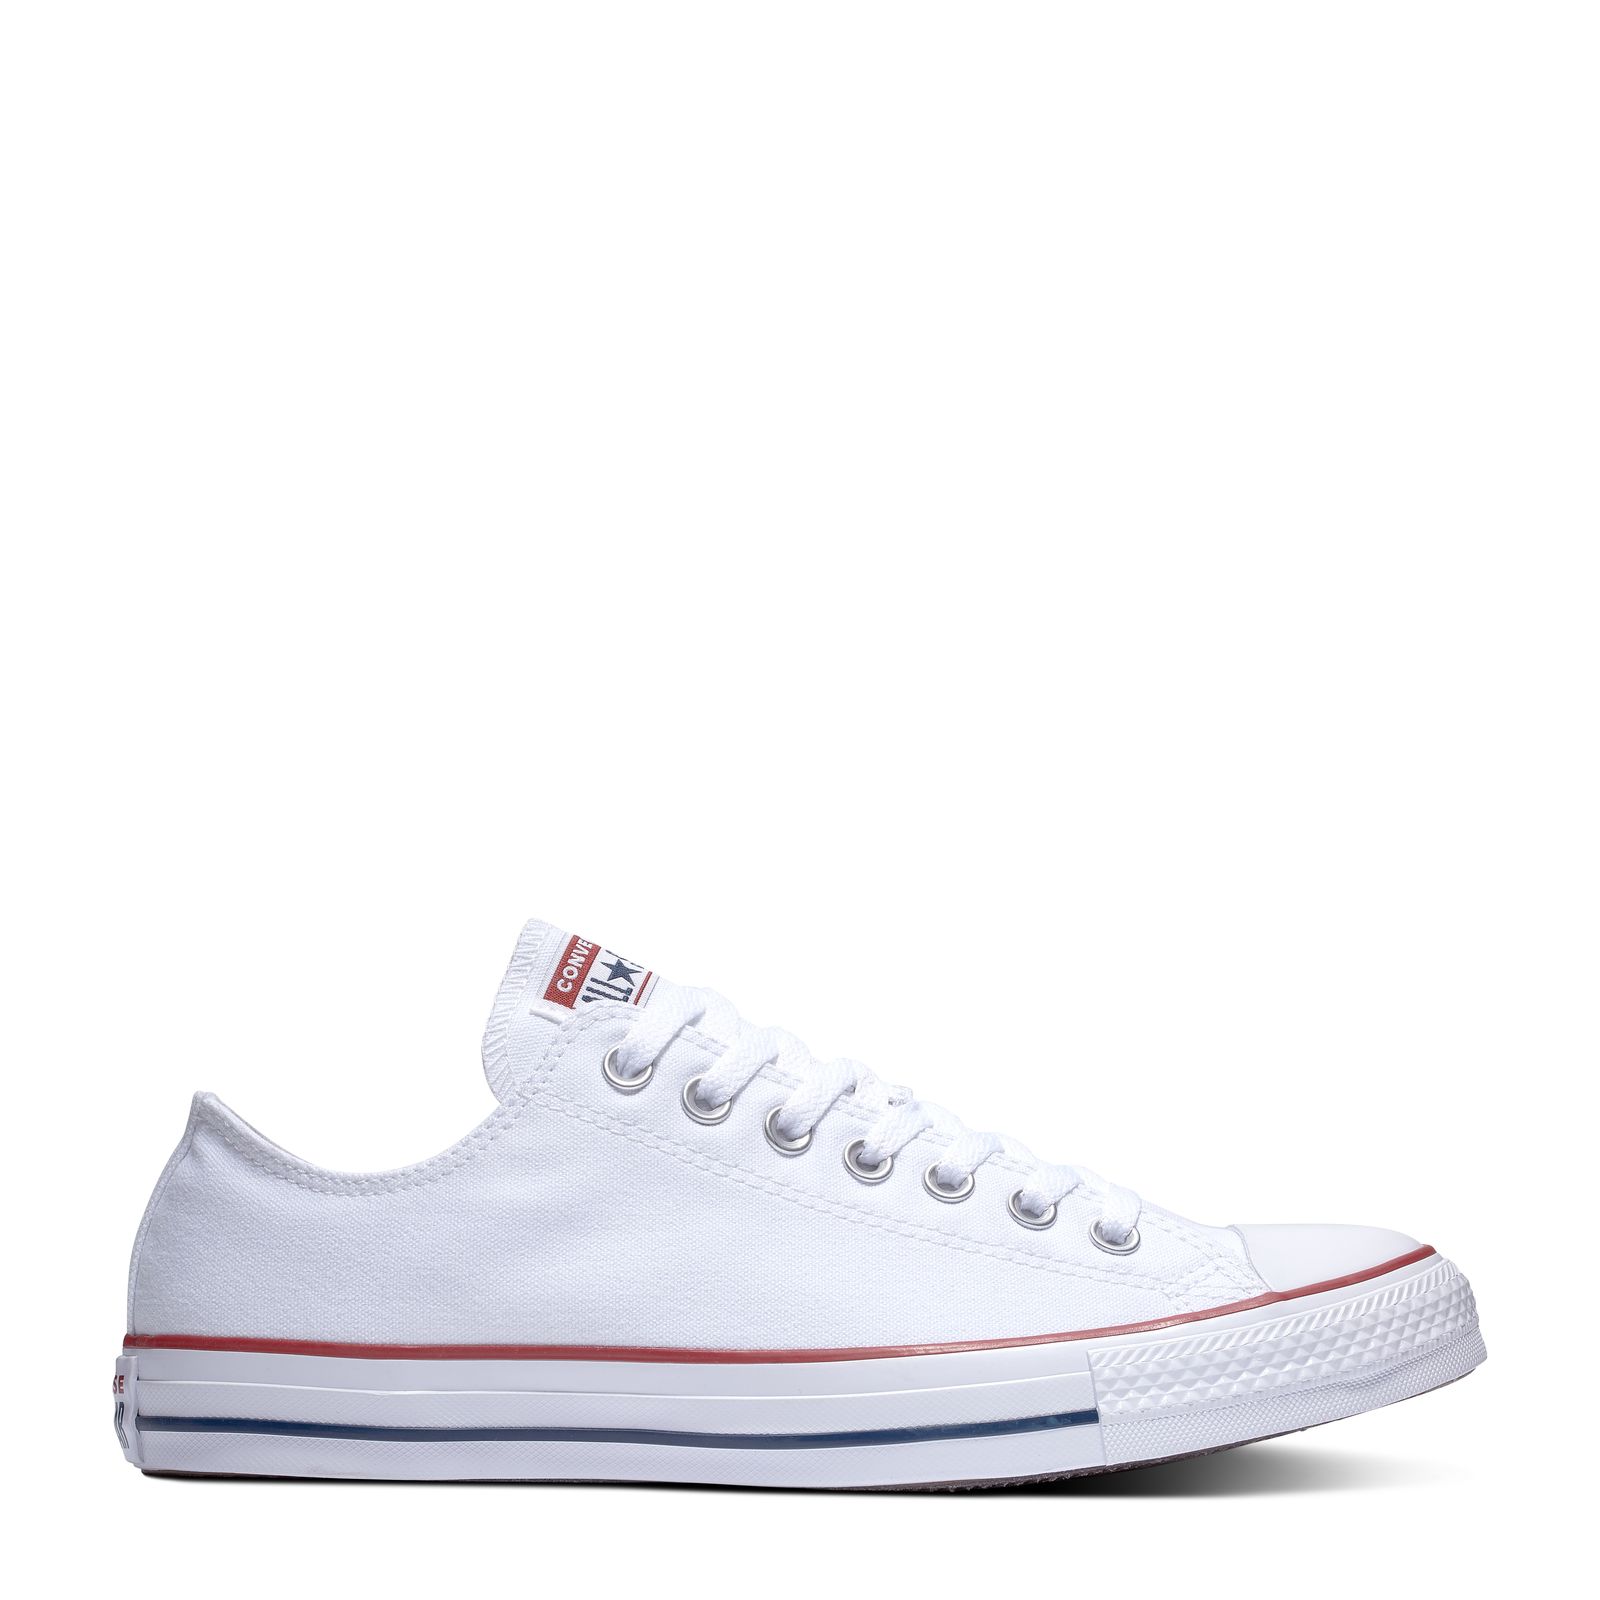 Converse M7652c Flash Sales, UP TO 69% OFF